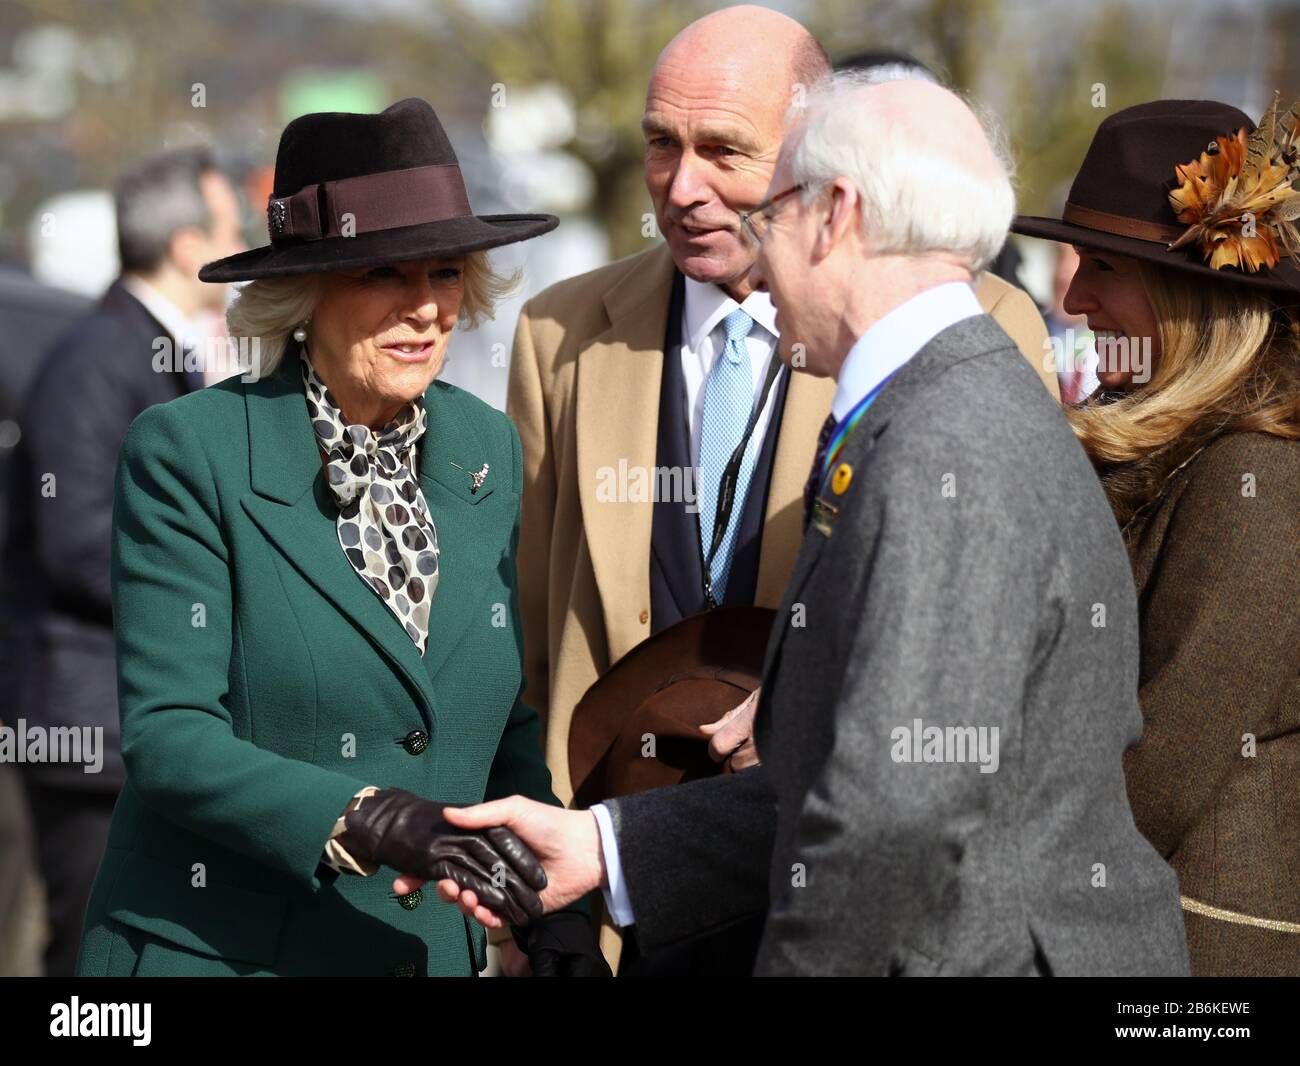 The Duchess of Cornwall speaks with Ian Renton (Regional Director Cheltenham and the South West - The Jockey Club) during day two of the Cheltenham Festival at Cheltenham Racecourse. Stock Photo